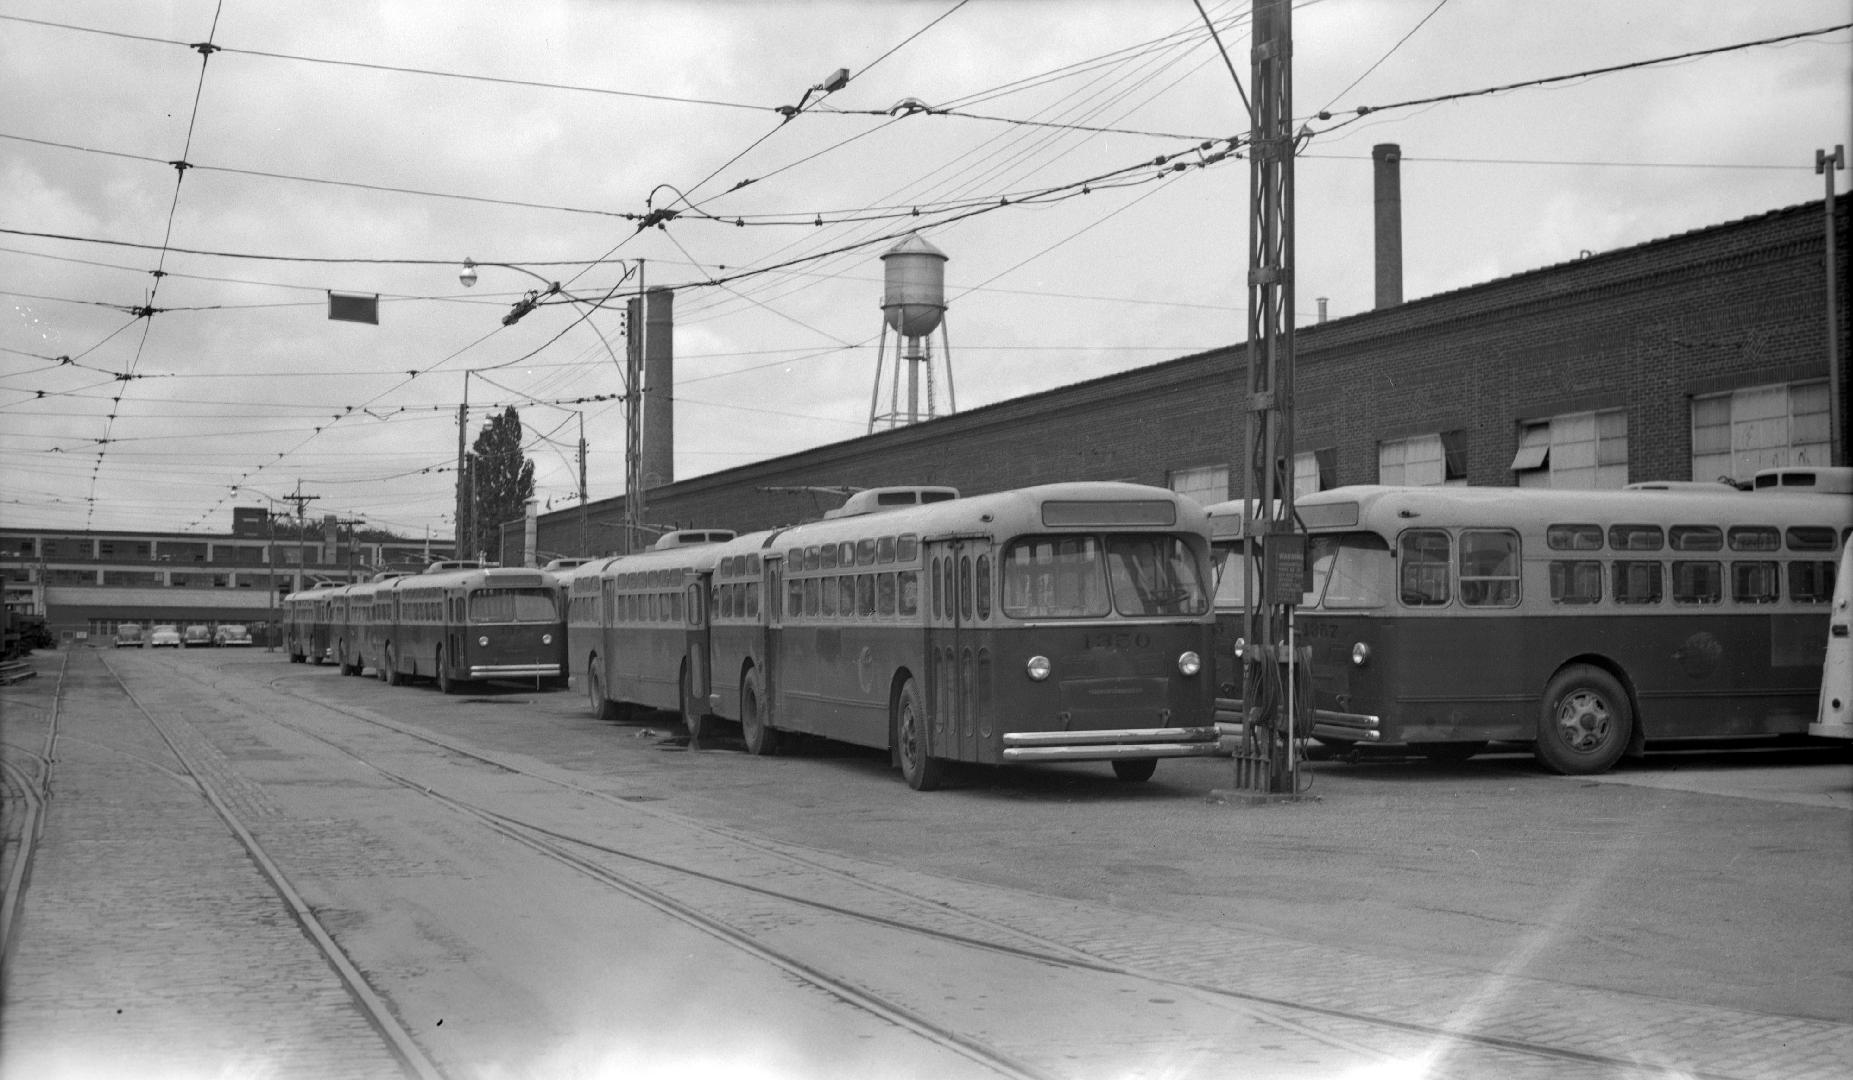 Image shows a few parked trolley buses.